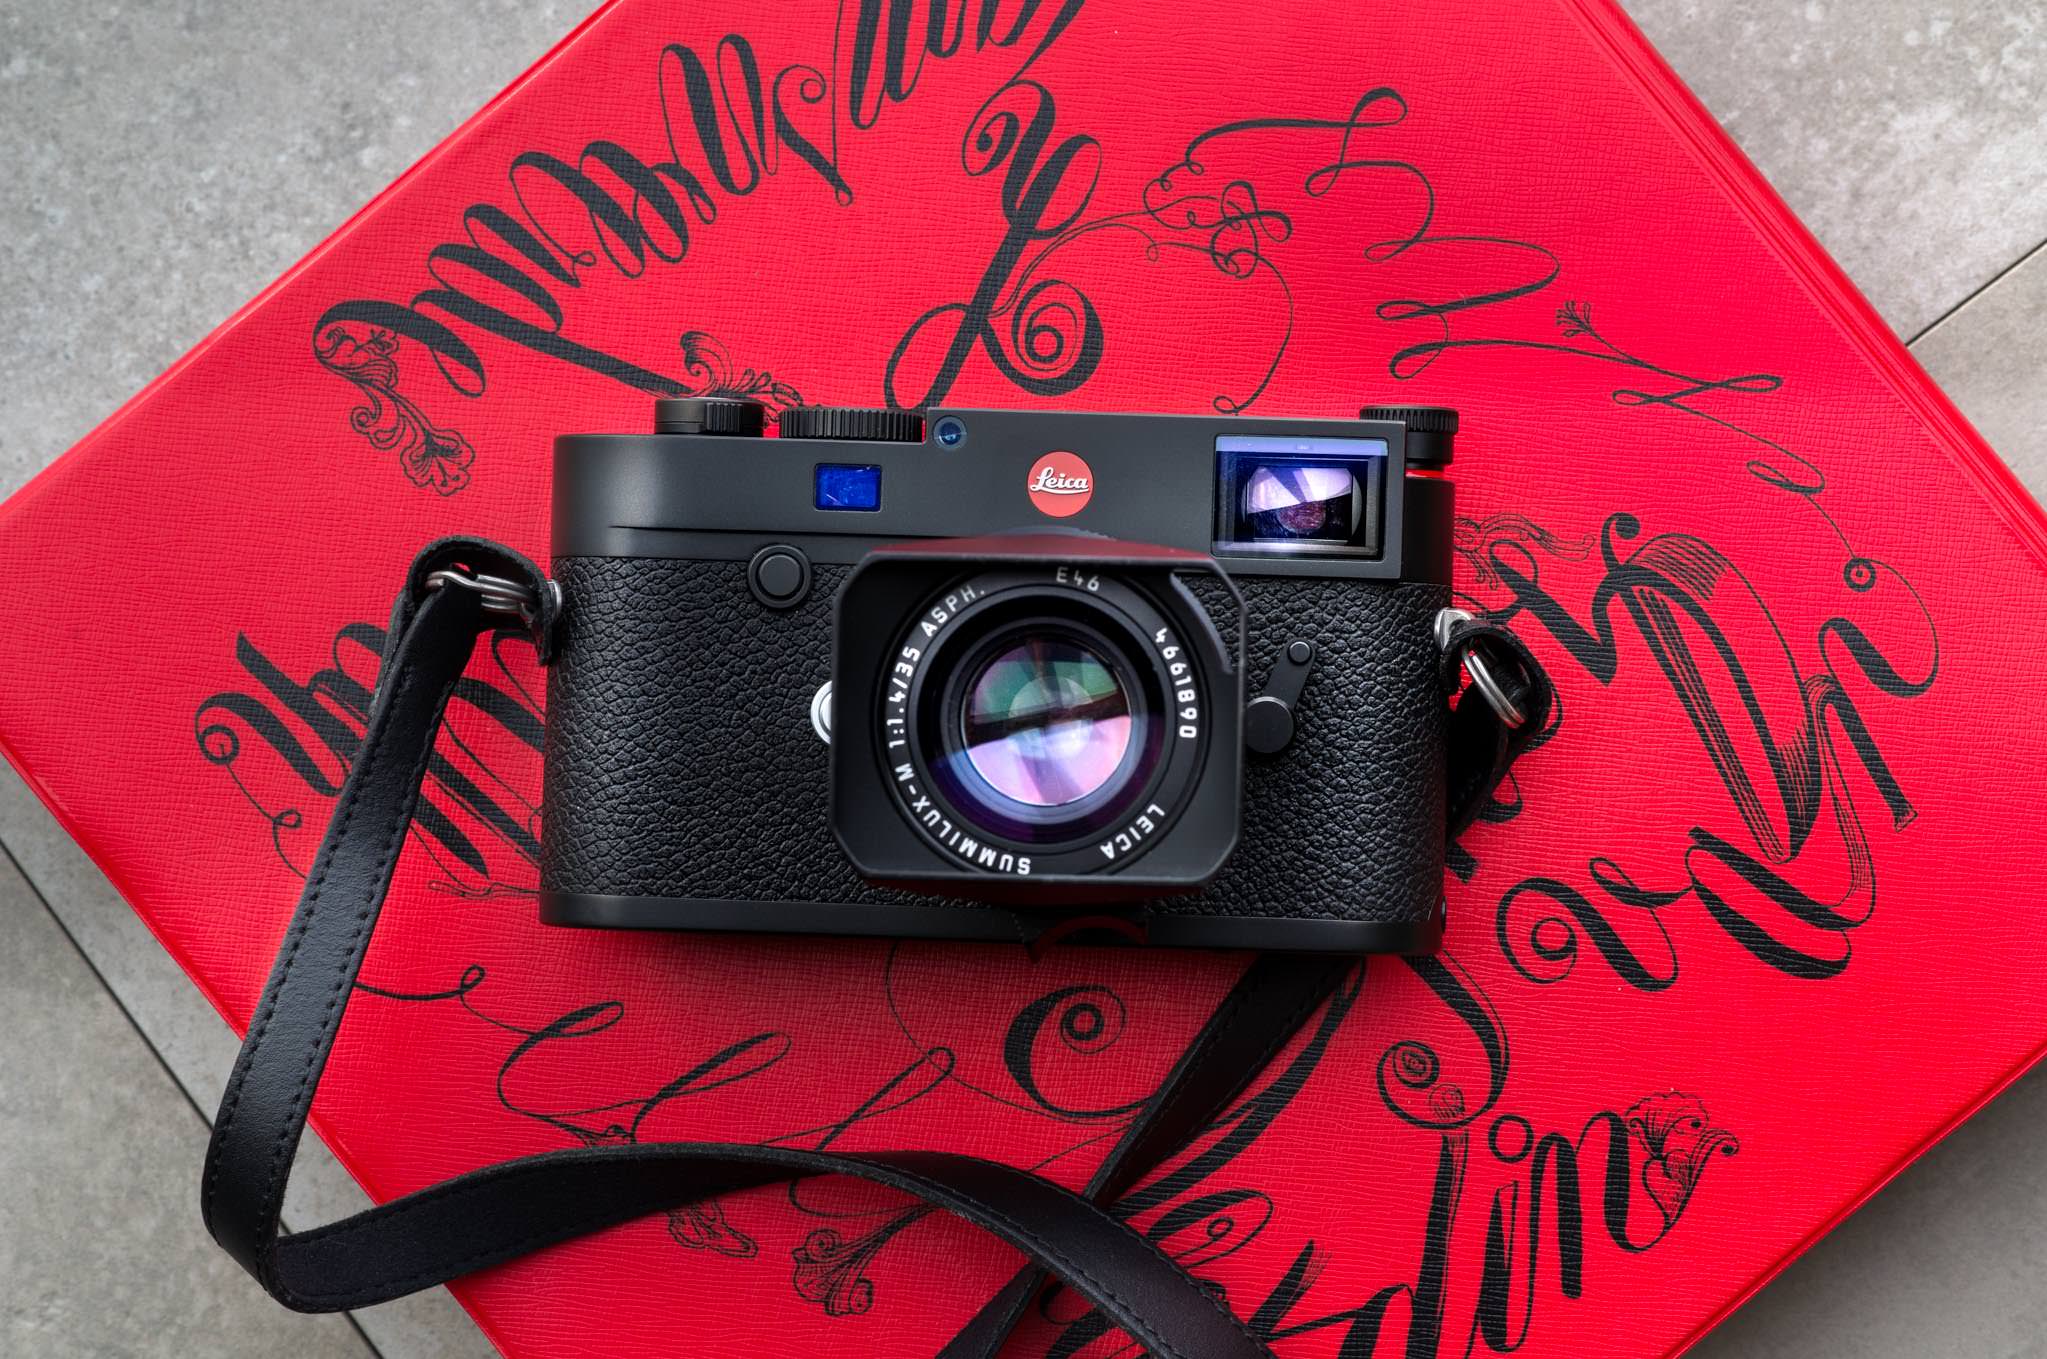 Leica M10 Hands On | Age & Guile VS. Youth & Savvy In Leica’s New Signature Dish